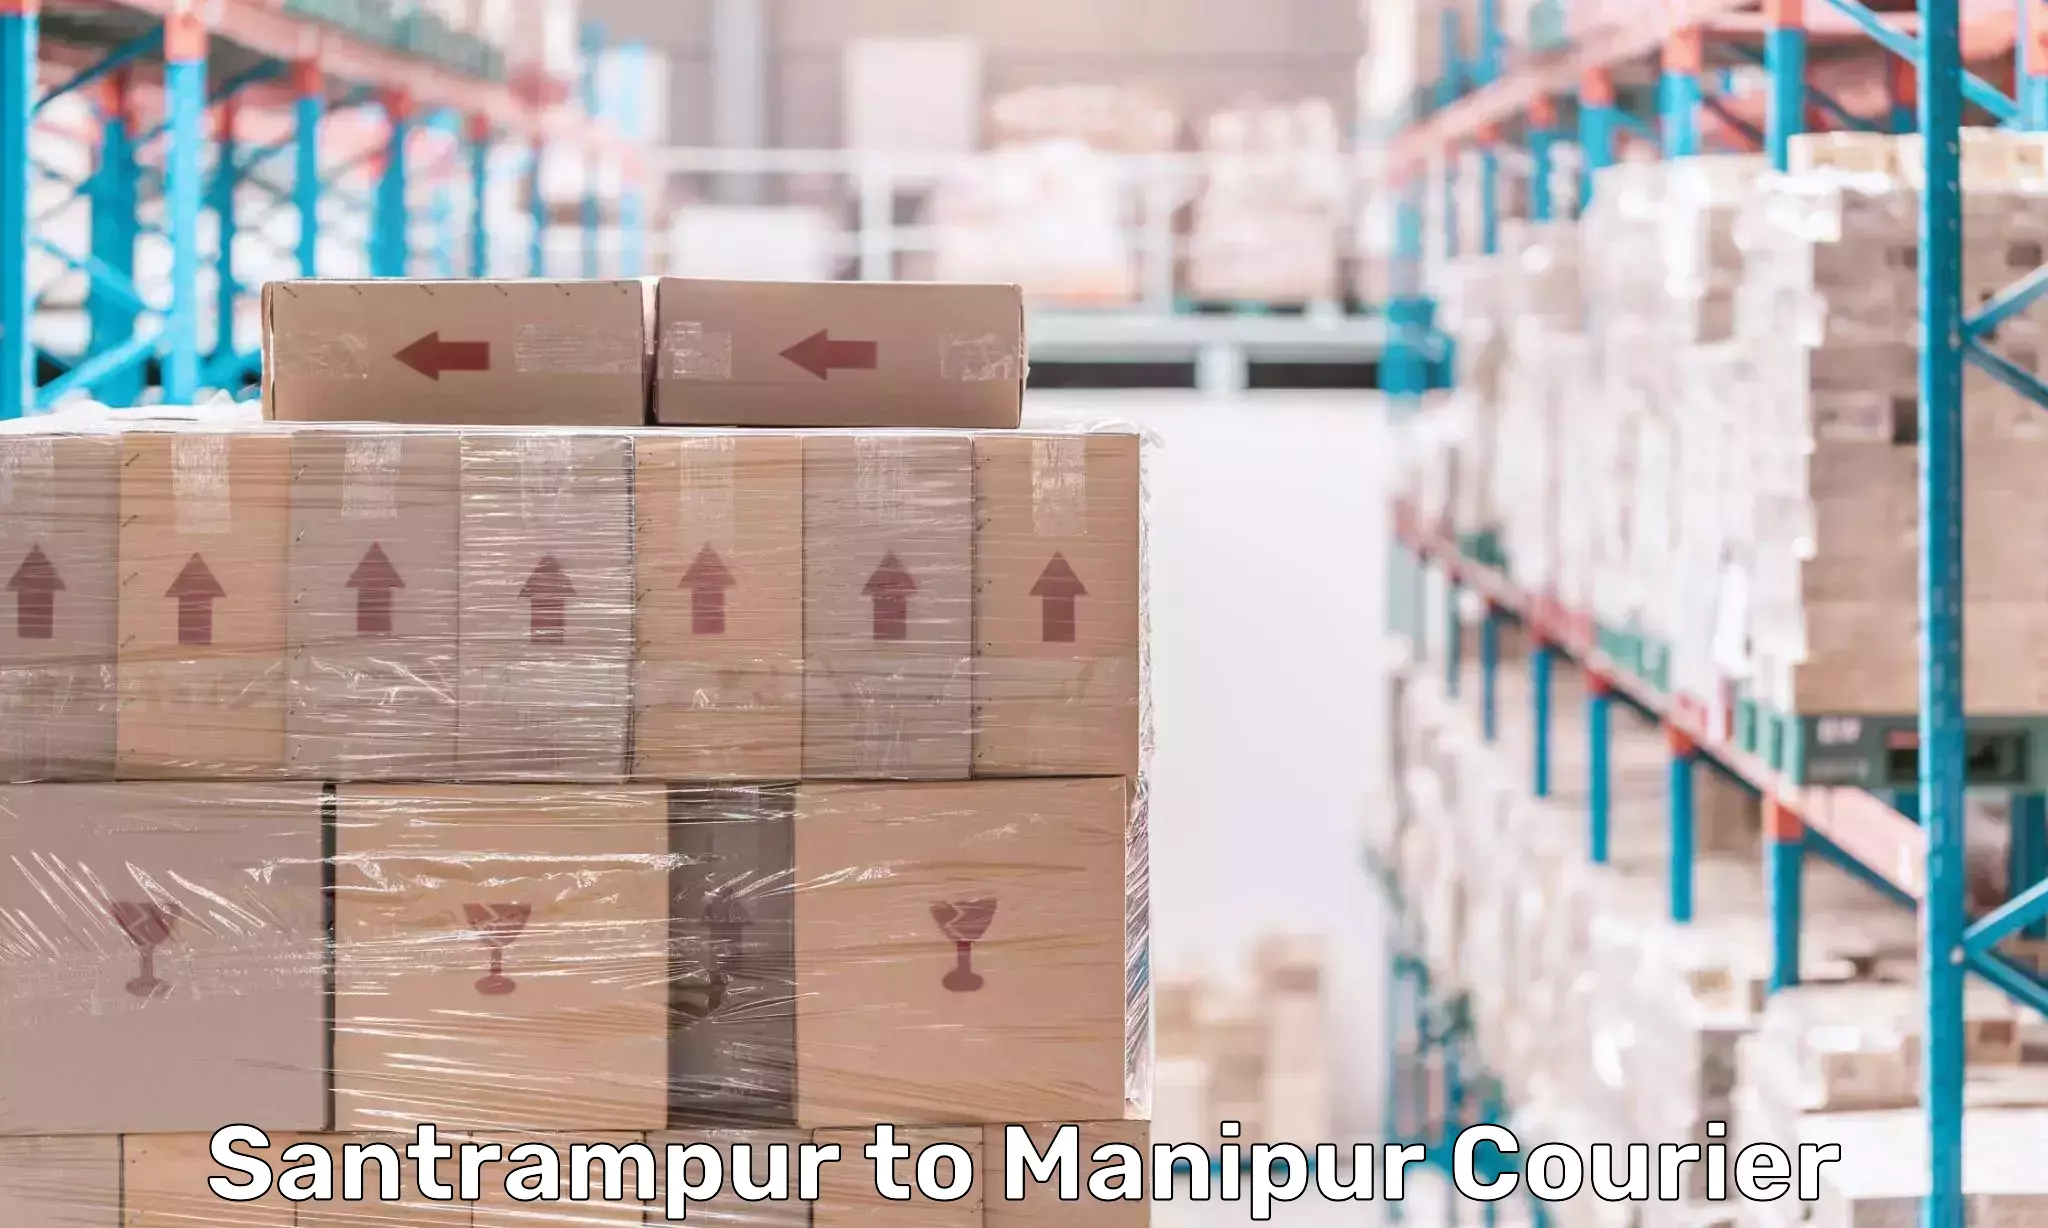 State-of-the-art courier technology Santrampur to Senapati